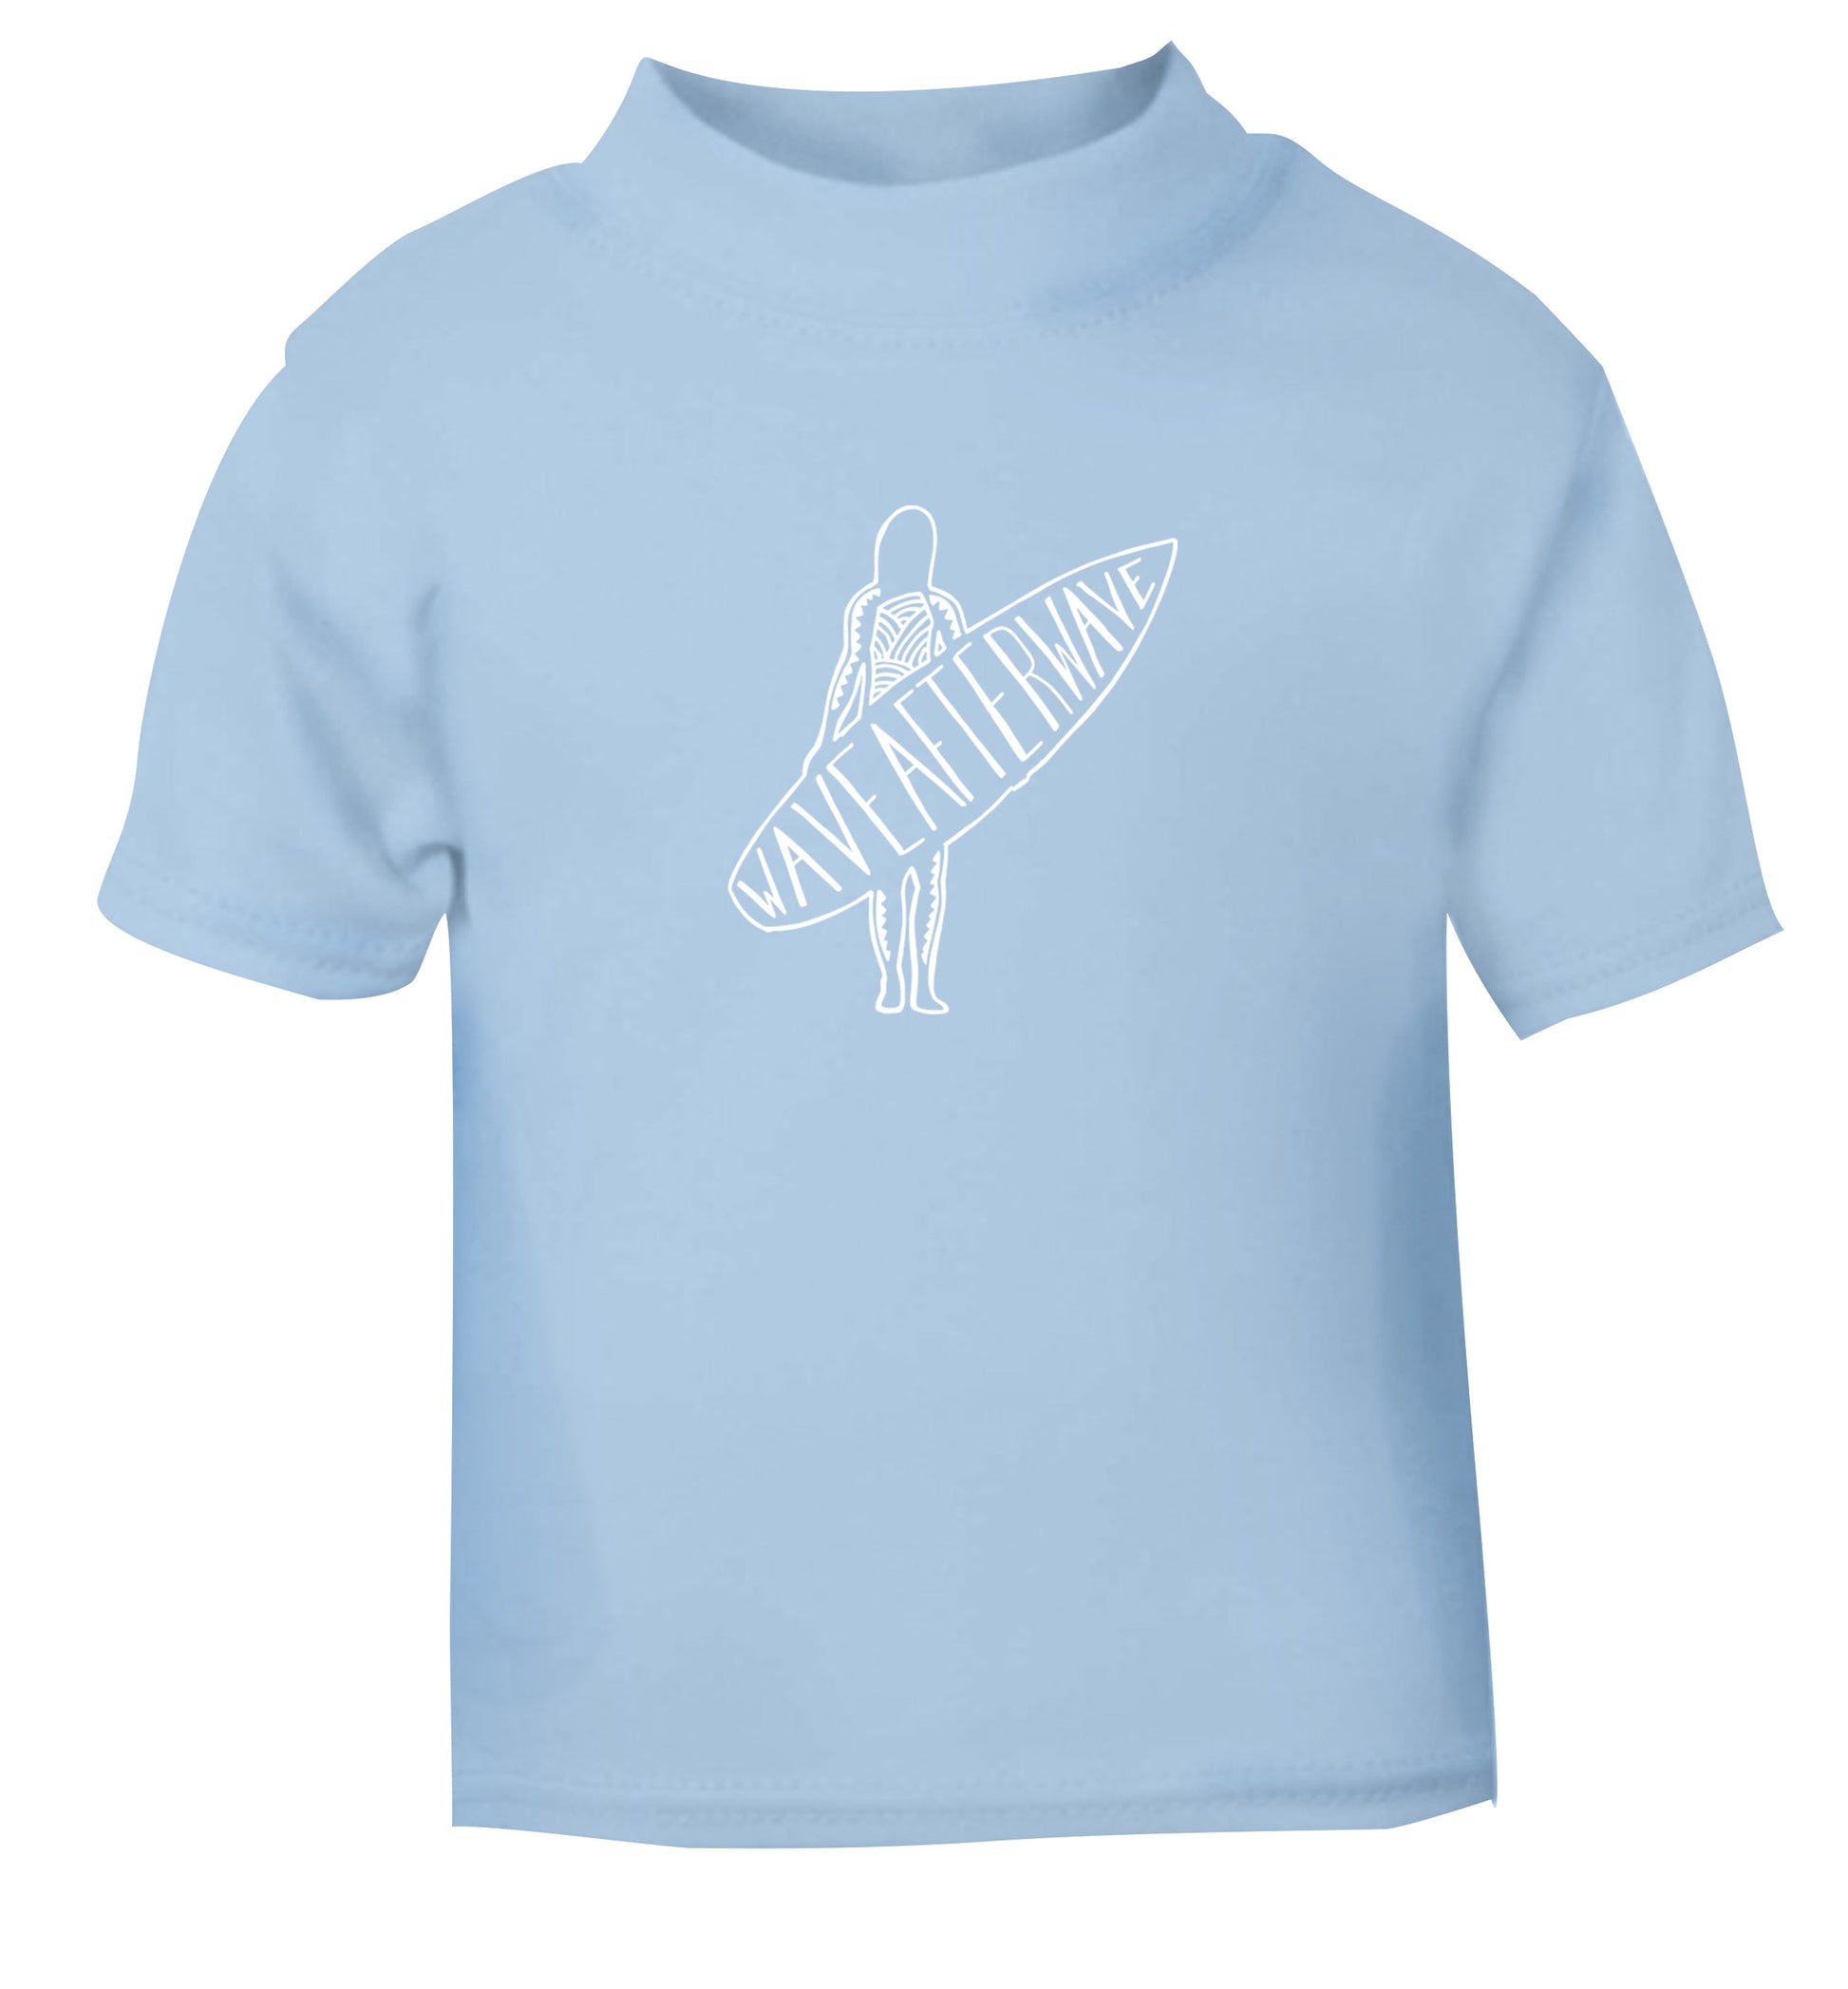 Wave after wave light blue Baby Toddler Tshirt 2 Years